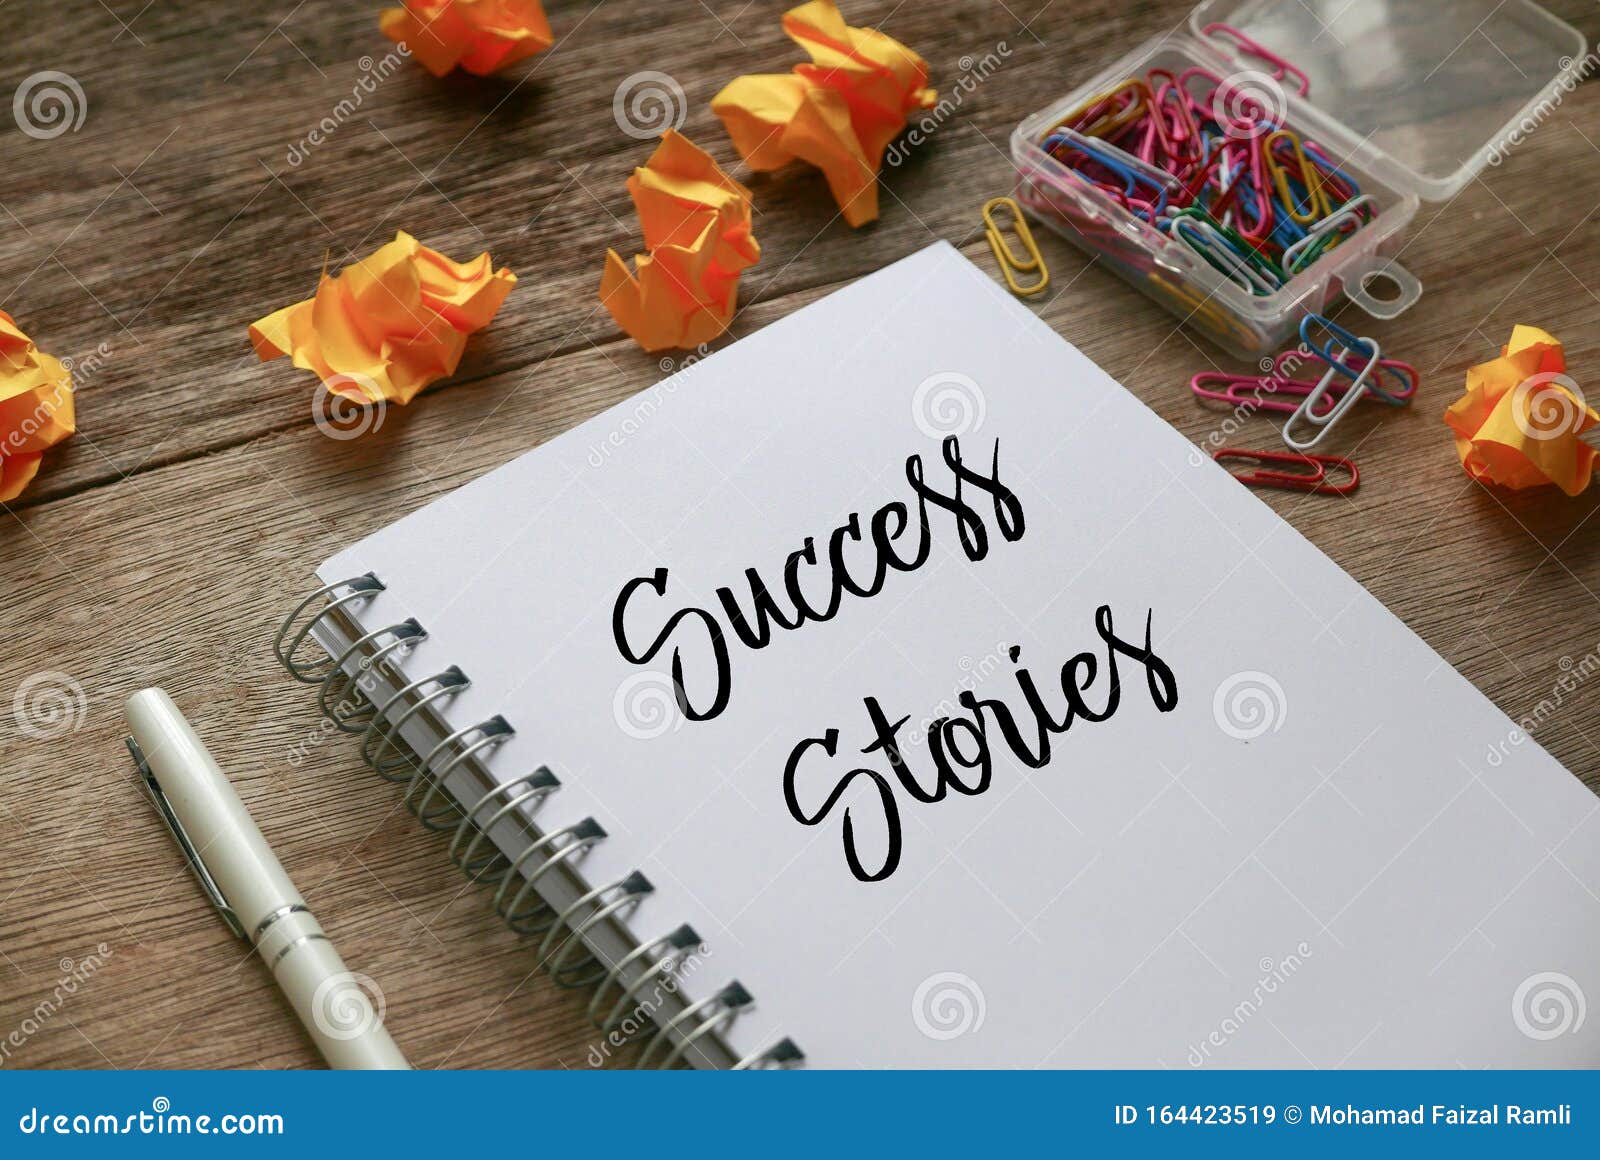 trash paper, paper clips,pen and notebook written with success stories on notebook on wooden background